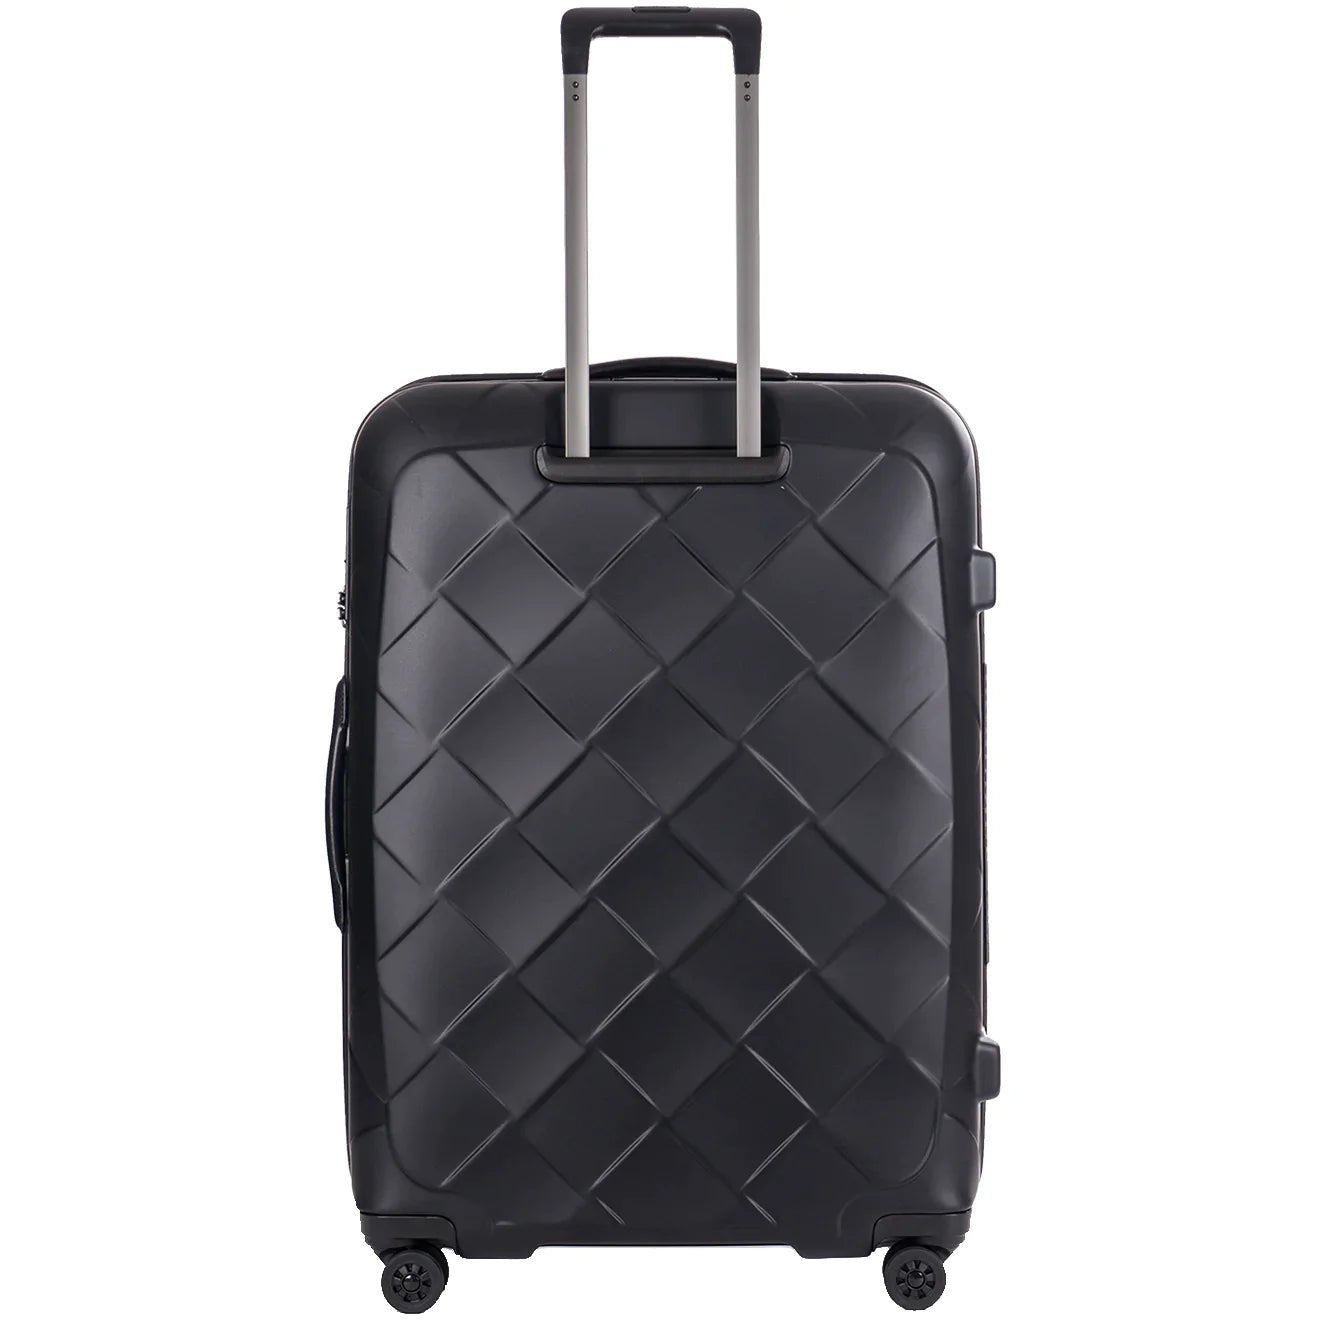 Stratic Leather & More 4-wheel trolley 76 cm - champagne